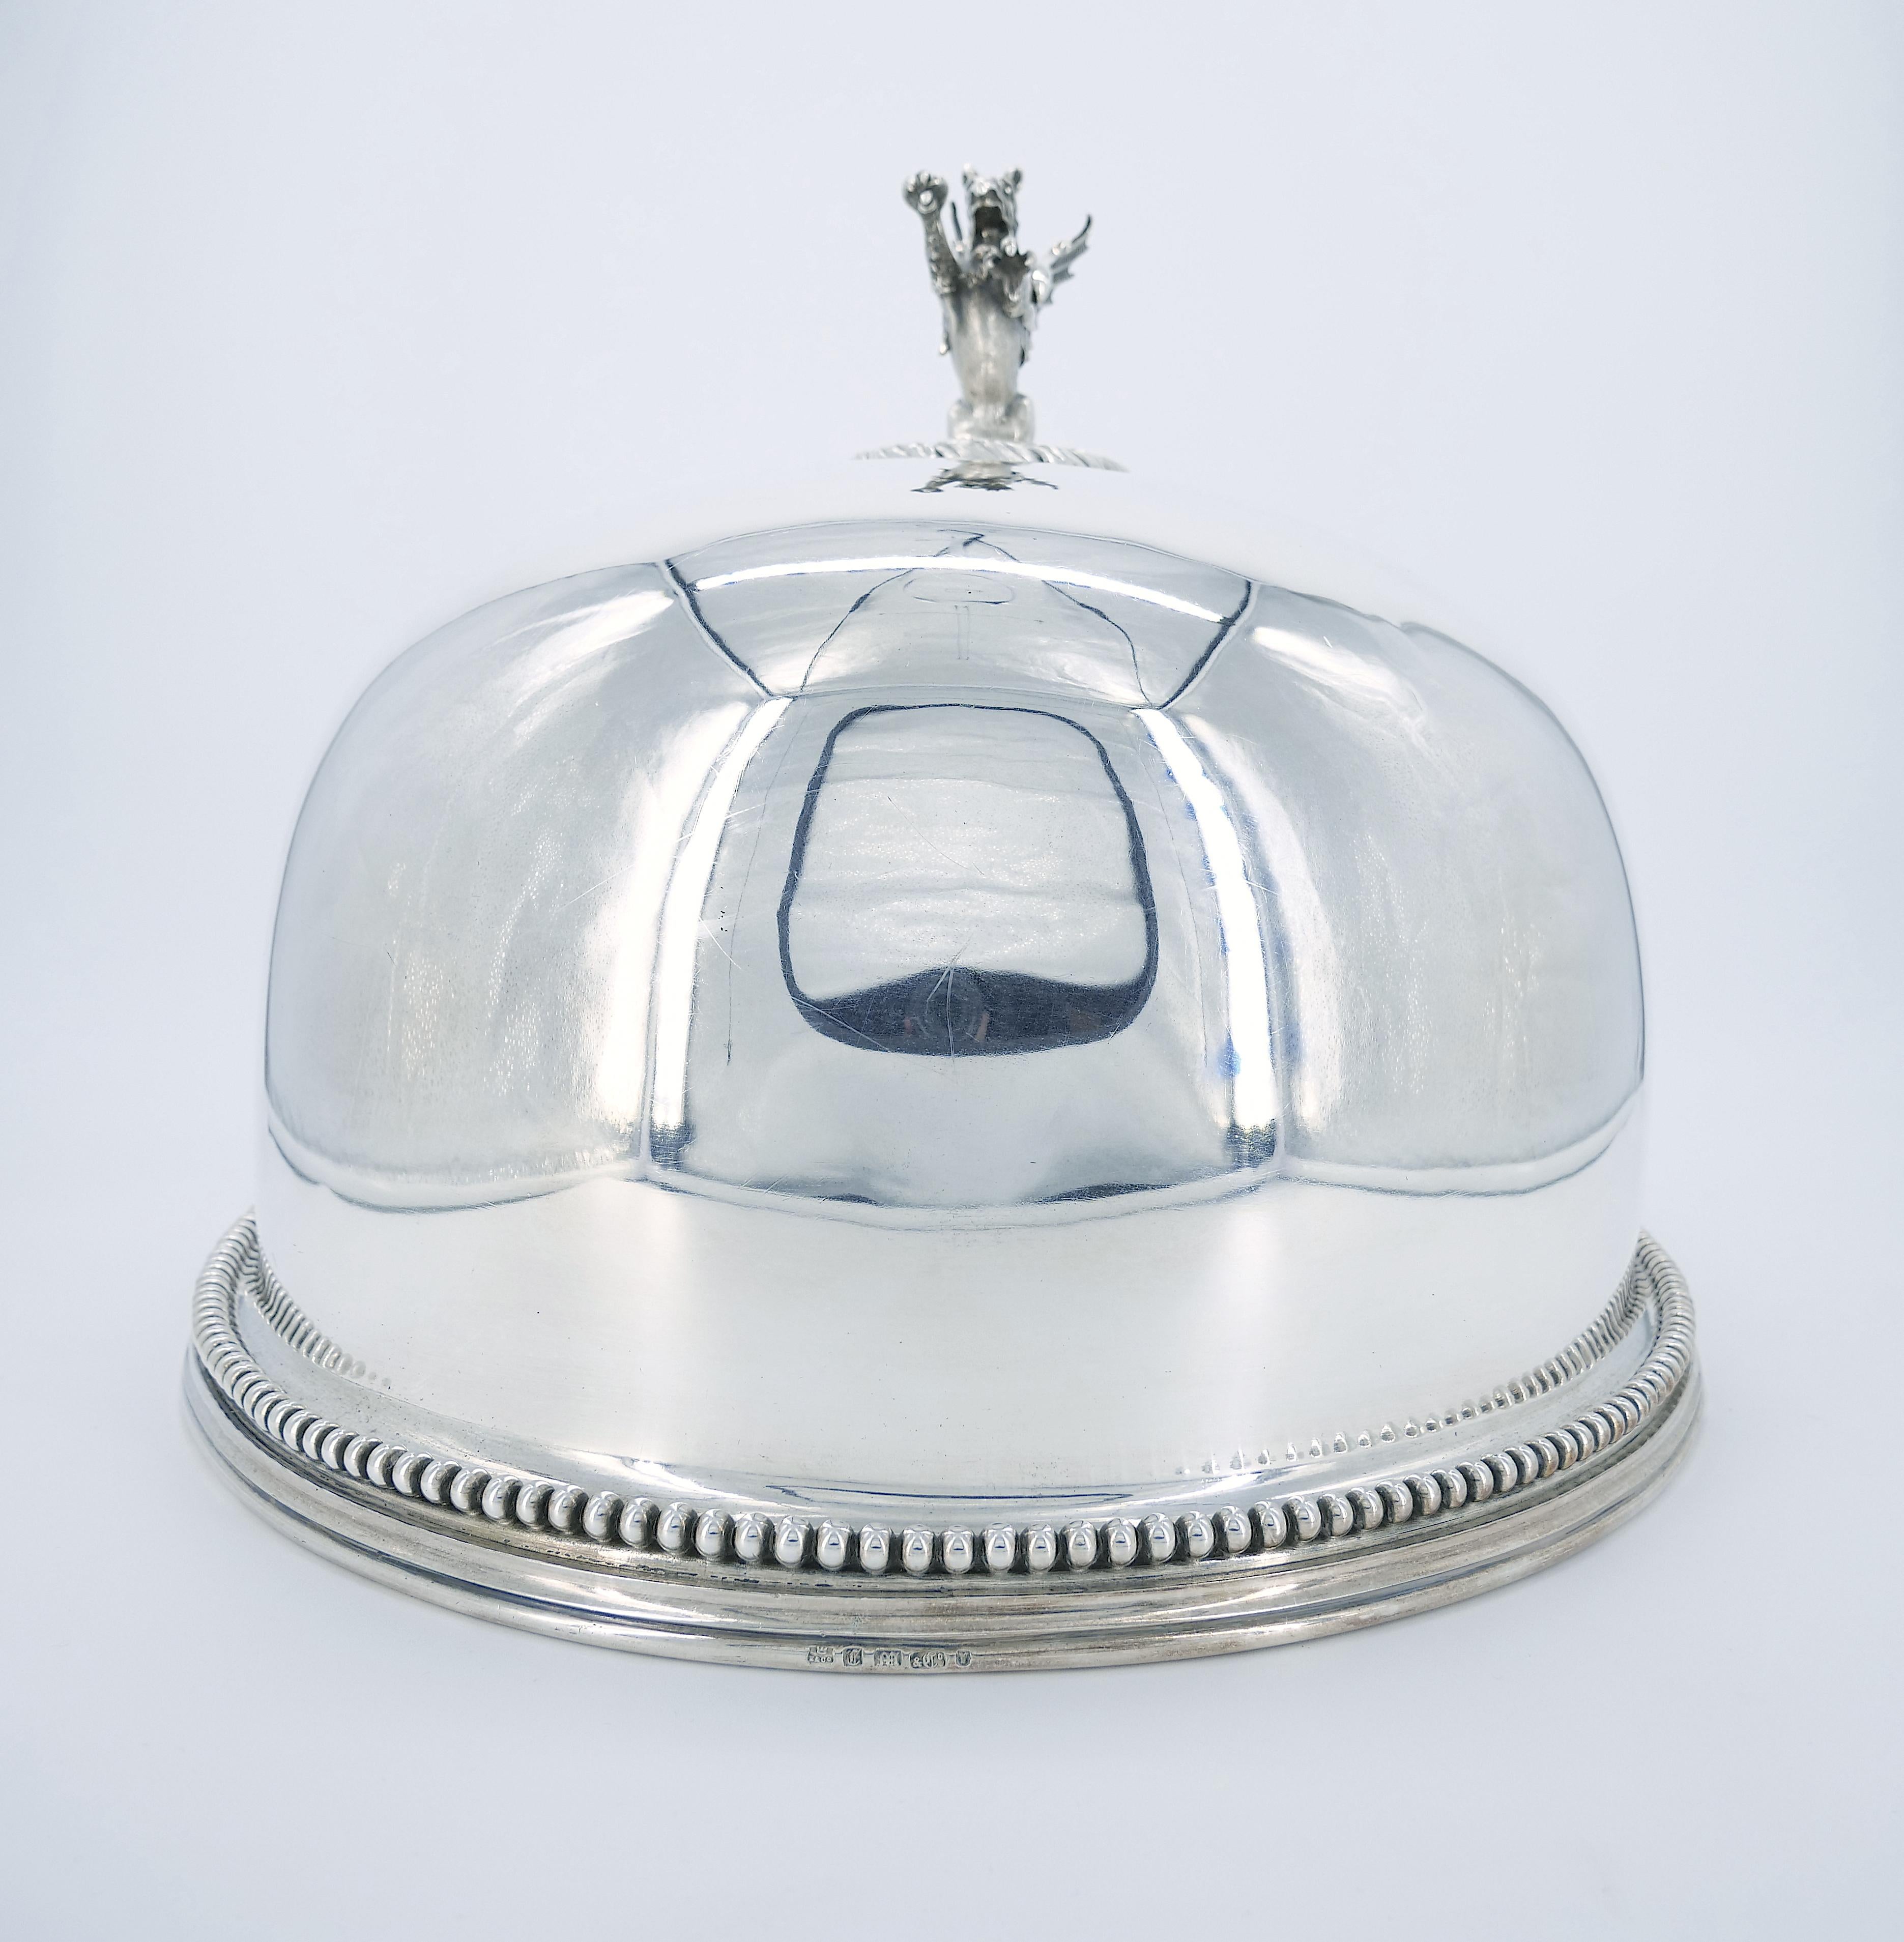 19th Century English Silverplate Meat Dome with Dragon Finial Handle For Sale 2